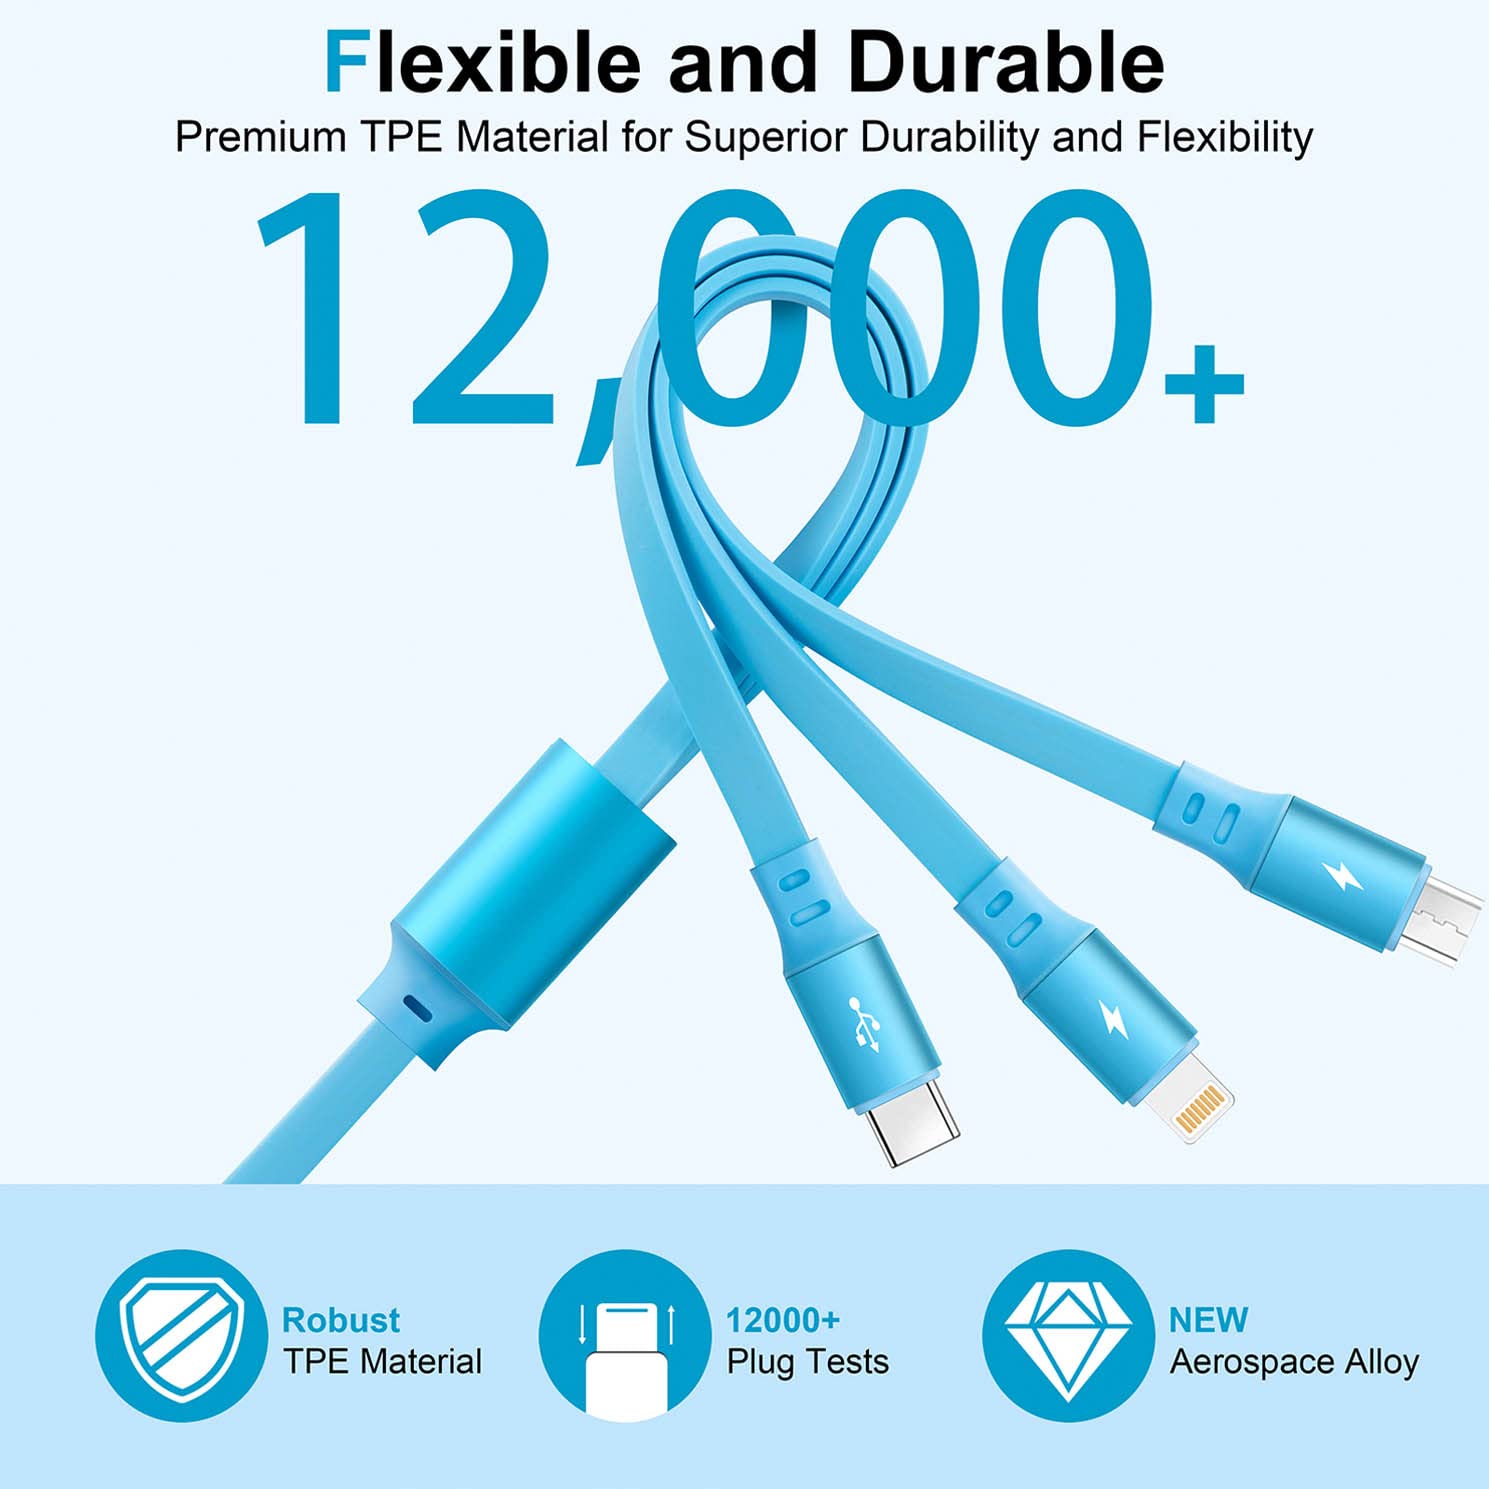 Multi Charging Cable,[2Pack 4FT] Retractable Fast Charging 3 in 1 USB Charger Cable Phone Charger Cord with Lightning/Type C/Micro USB Port for Cell Phones,iPhone,iPad,Samsung Galaxy,PS,Tablet,More